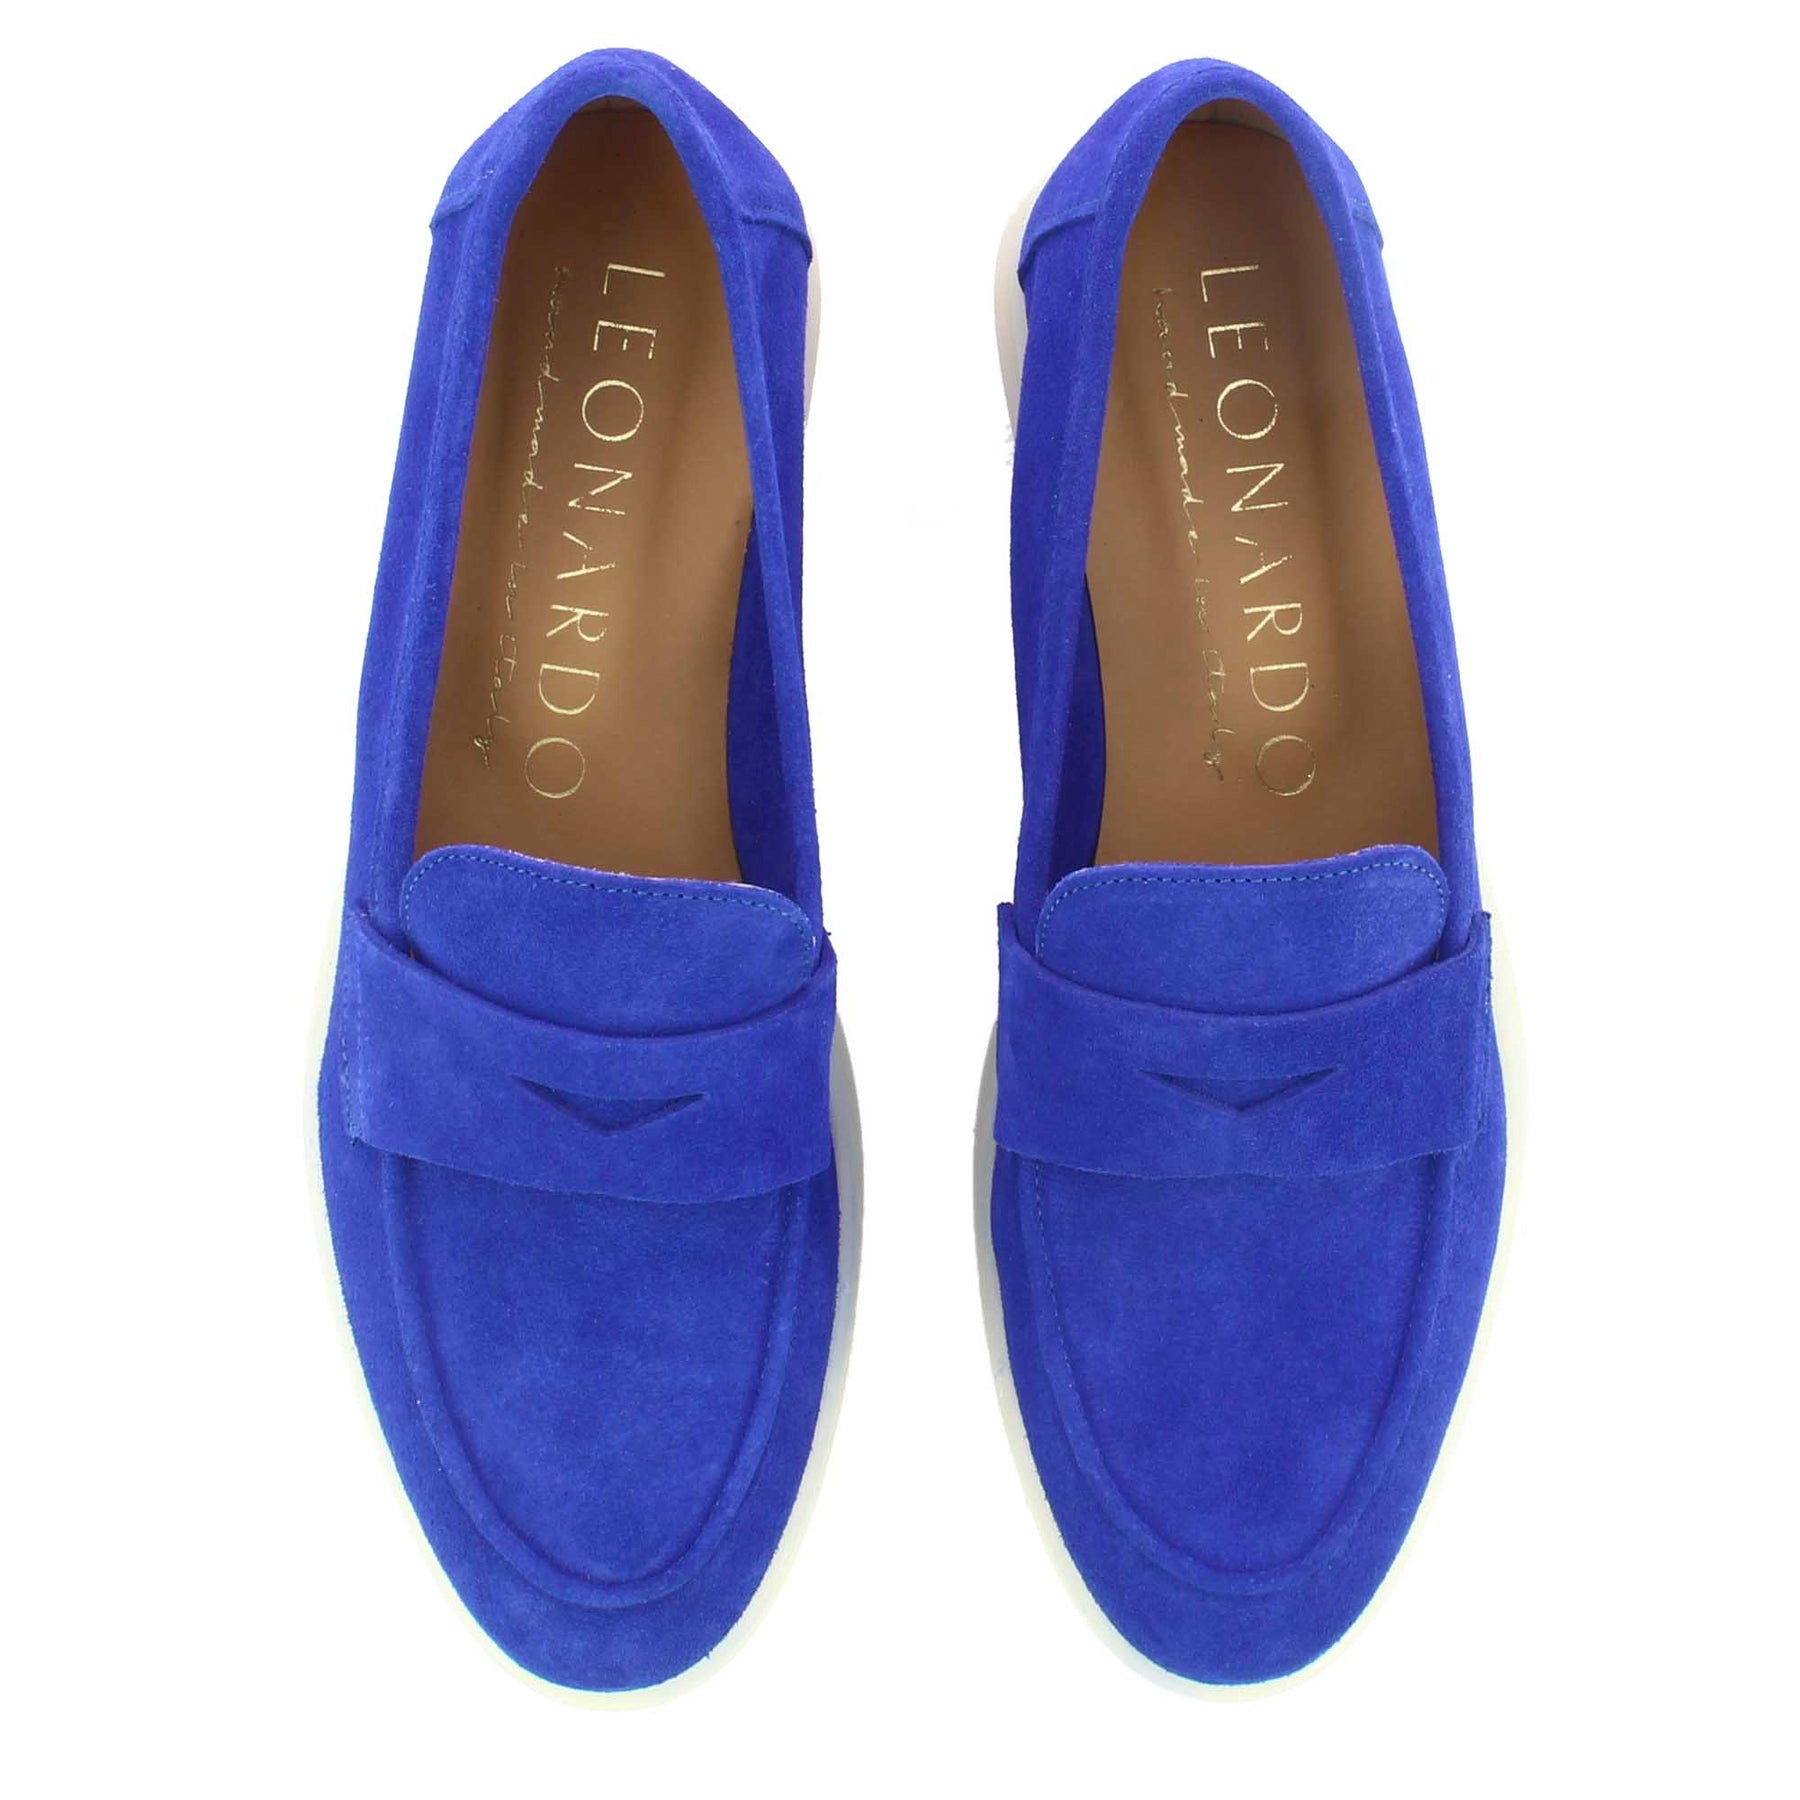 Classic women's moccasin in blue suede